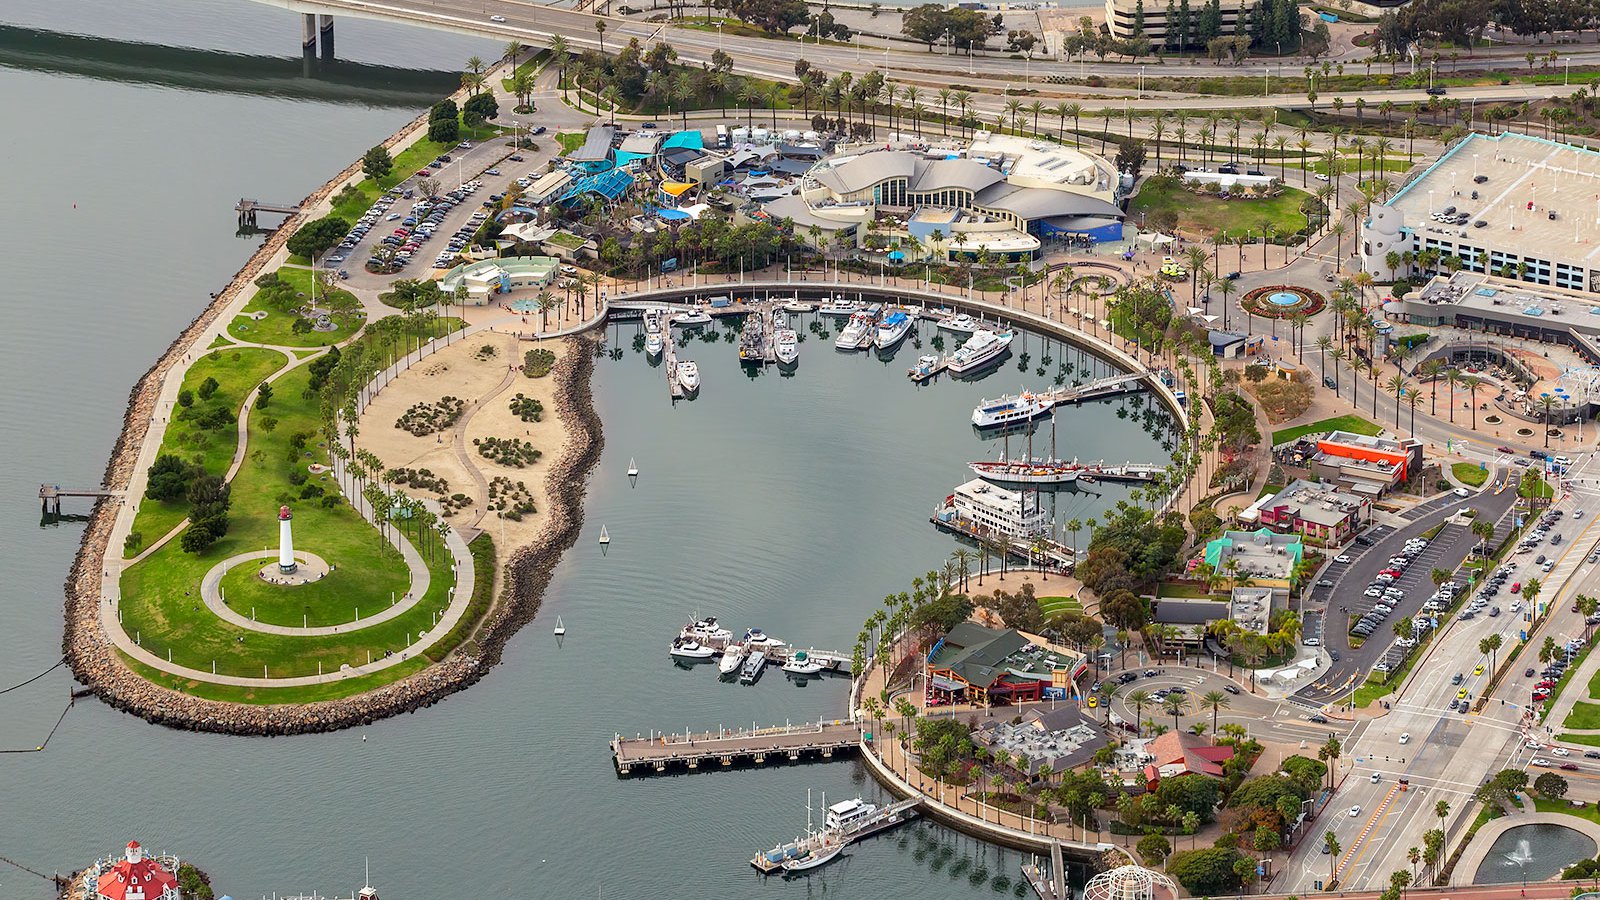 Blog image of the Aquarium of the Pacific and ShoreLine Aquatic Park on the Long Beach Waterfront